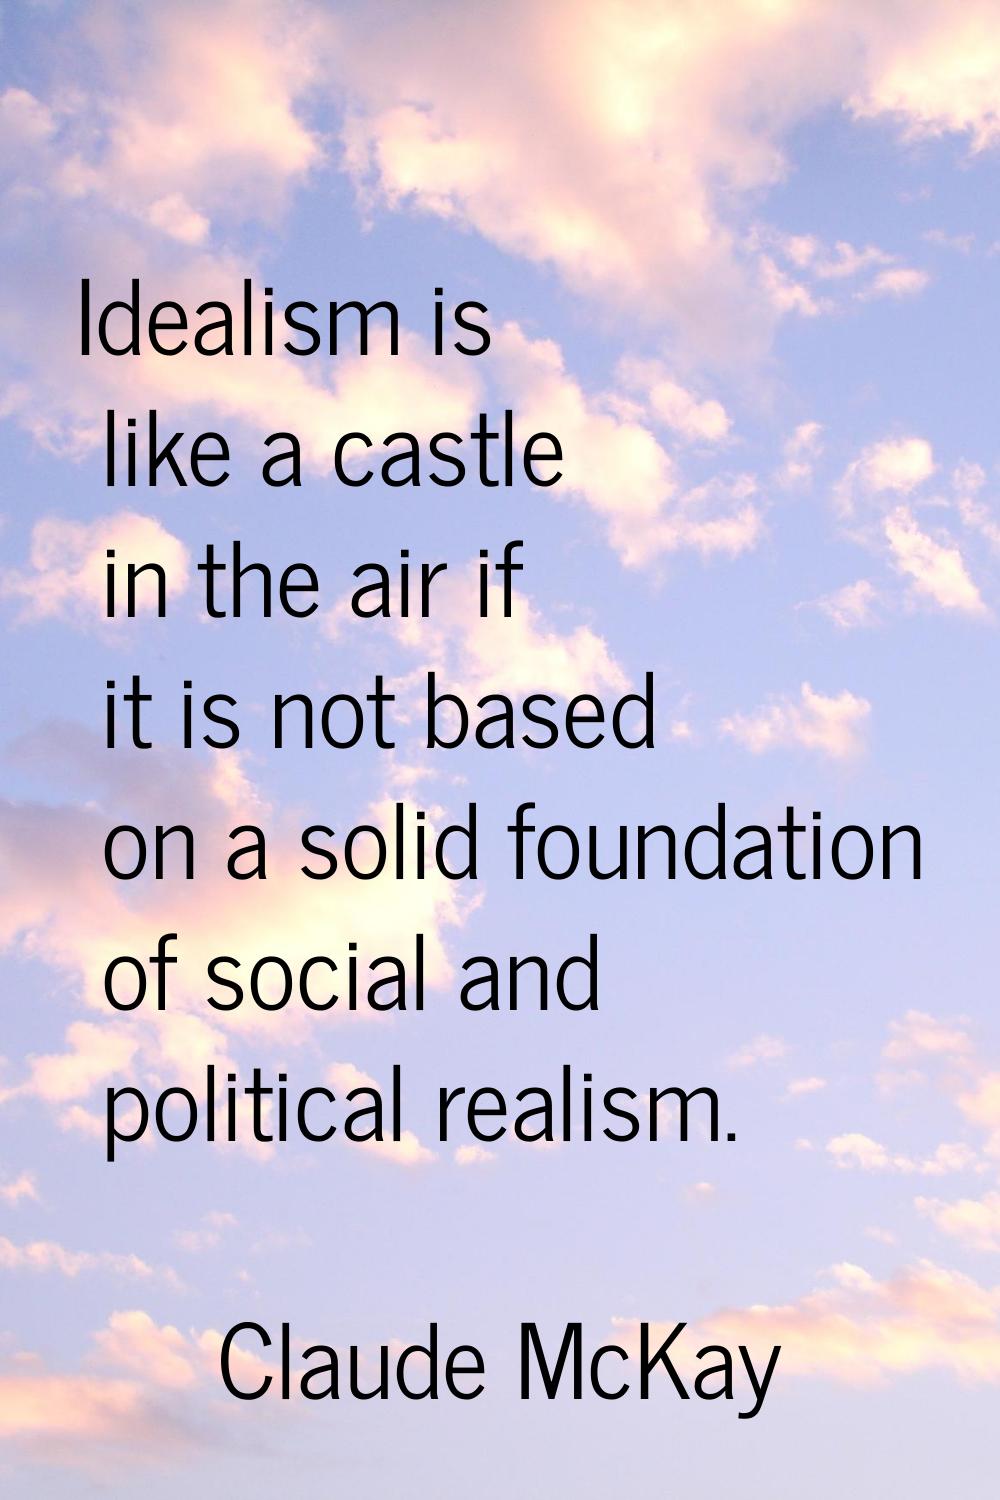 Idealism is like a castle in the air if it is not based on a solid foundation of social and politic